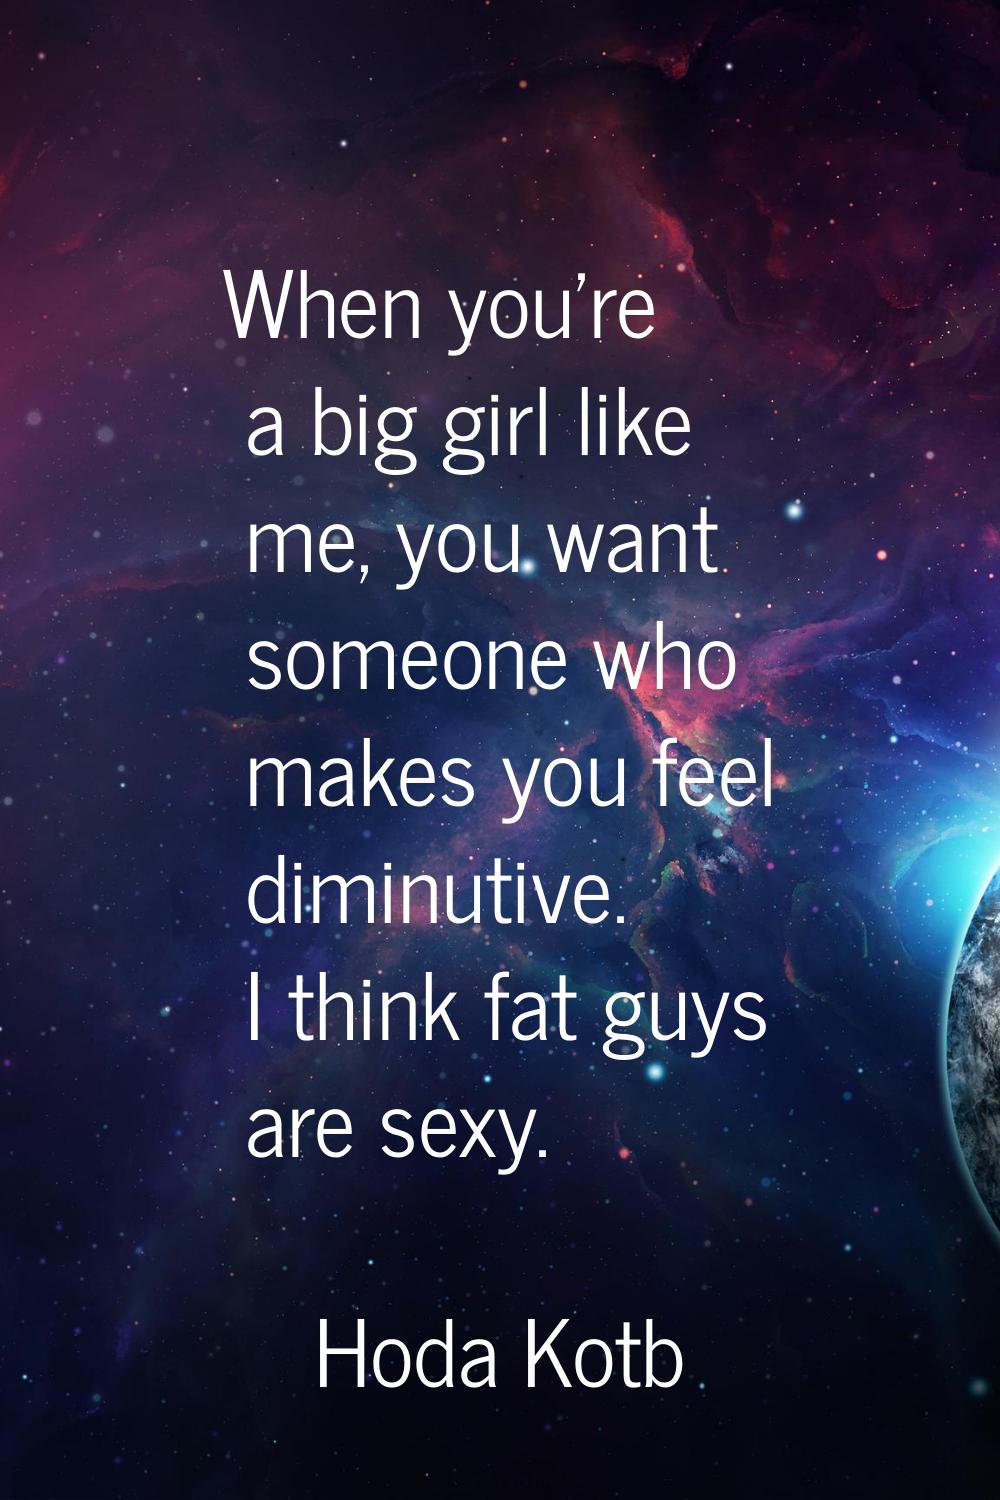 When you're a big girl like me, you want someone who makes you feel diminutive. I think fat guys ar